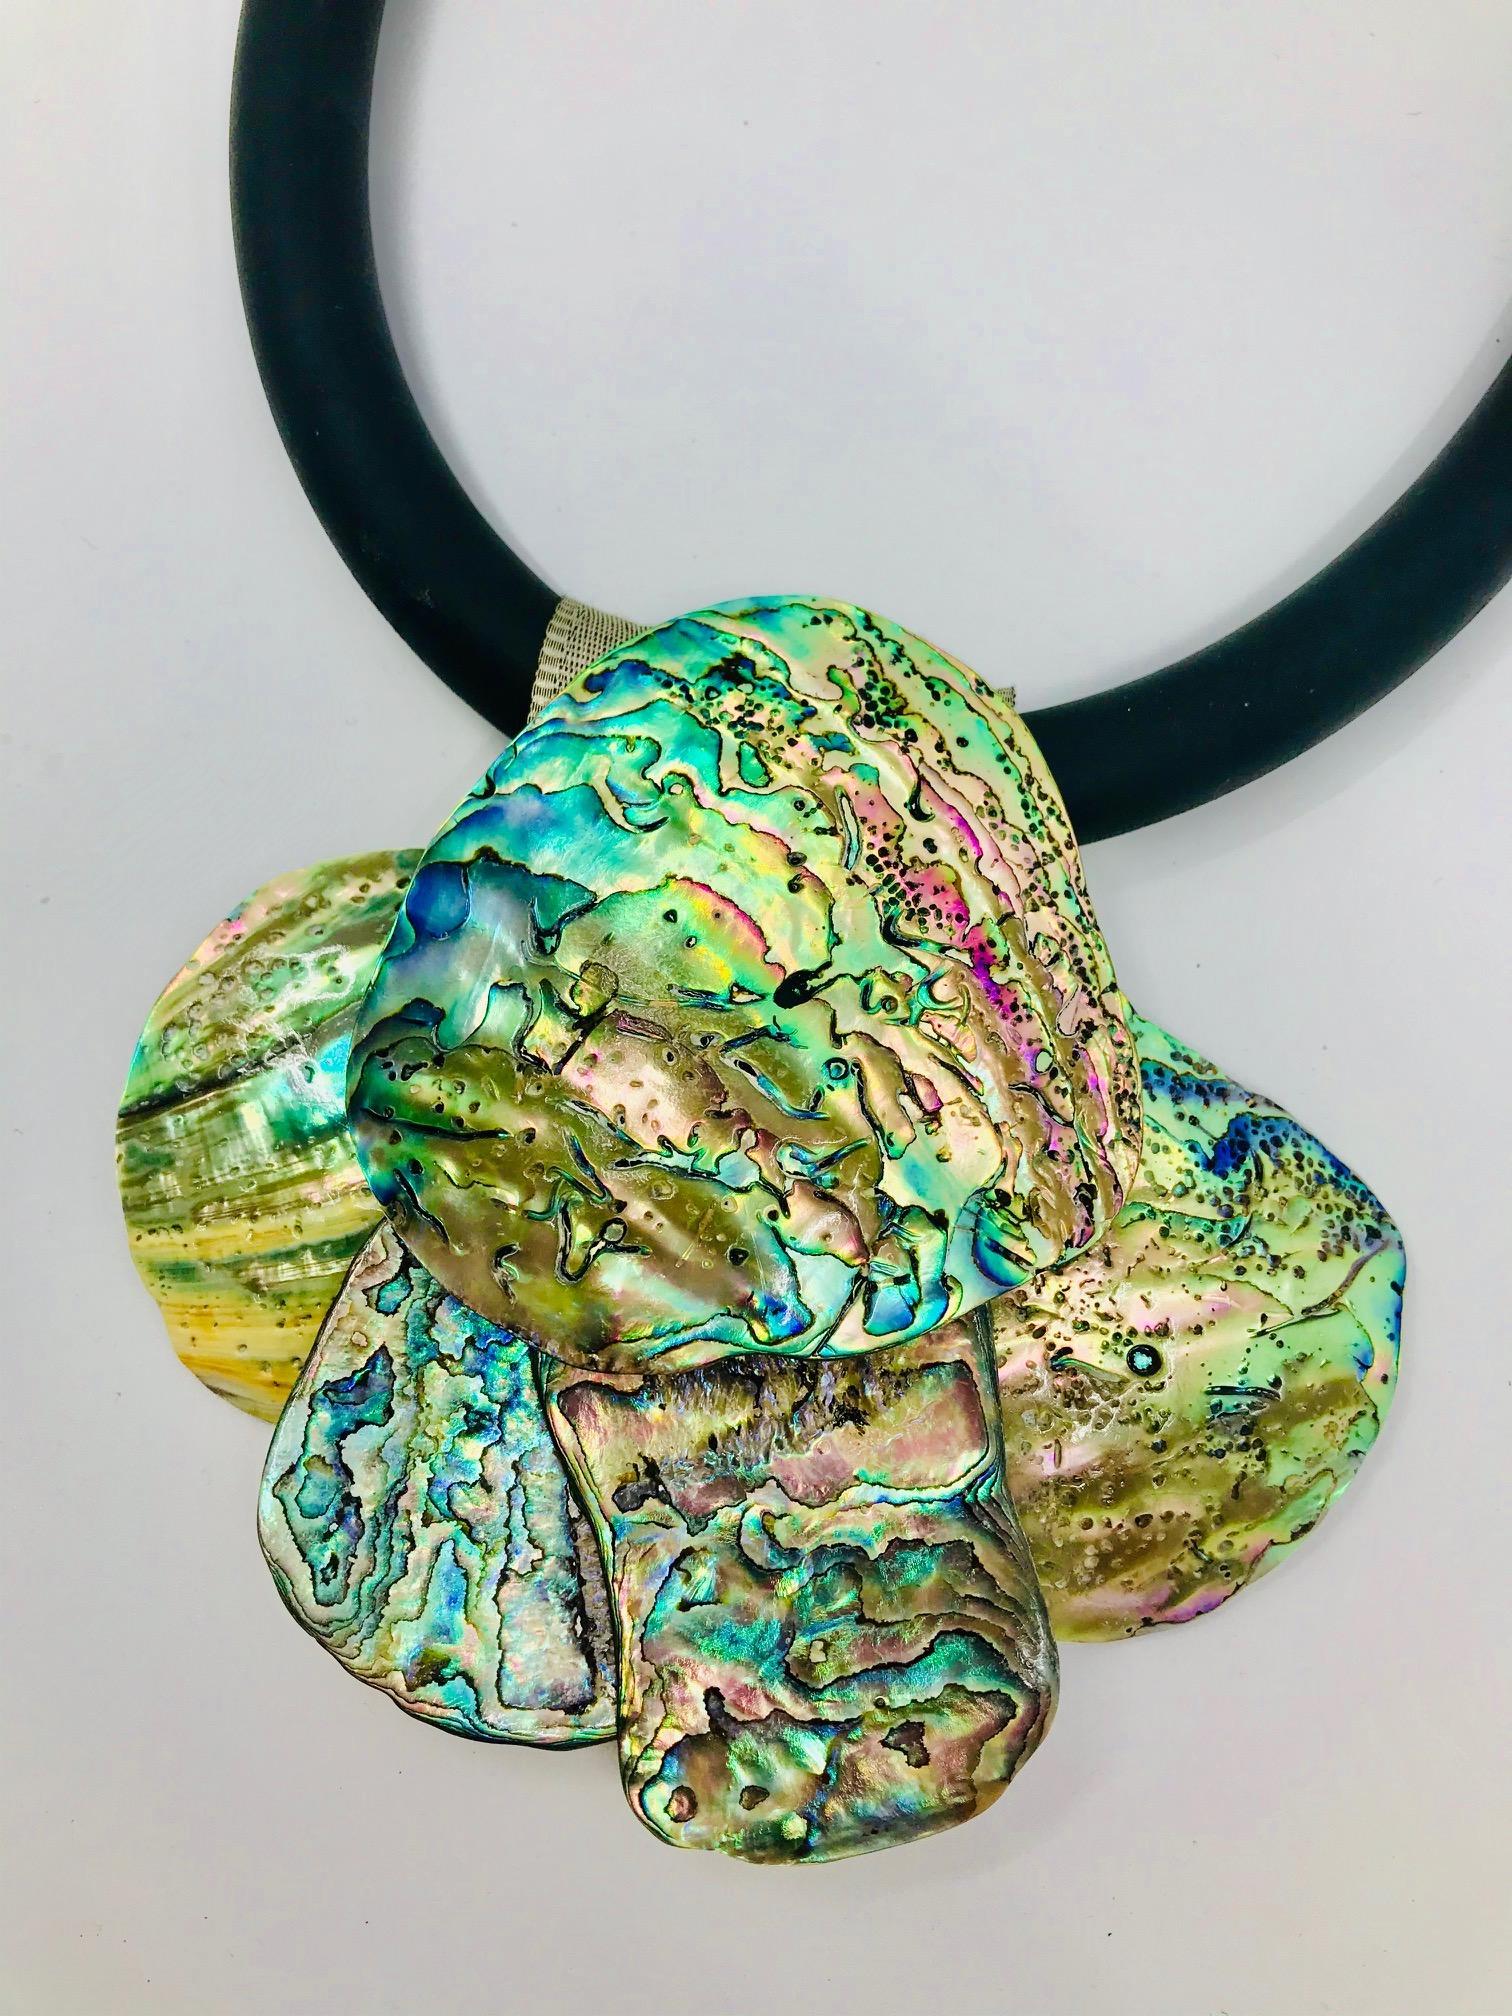 Haliotis /Paua Pendant on black rubber tube, consists of 5 organic shape large Paua shell petals. The 15 mm rubber tube is finished by tubular silver clasp. Paua is a shell from New Zeland.

Haliotis / Abalone / Paua nacreous  shell is one of the